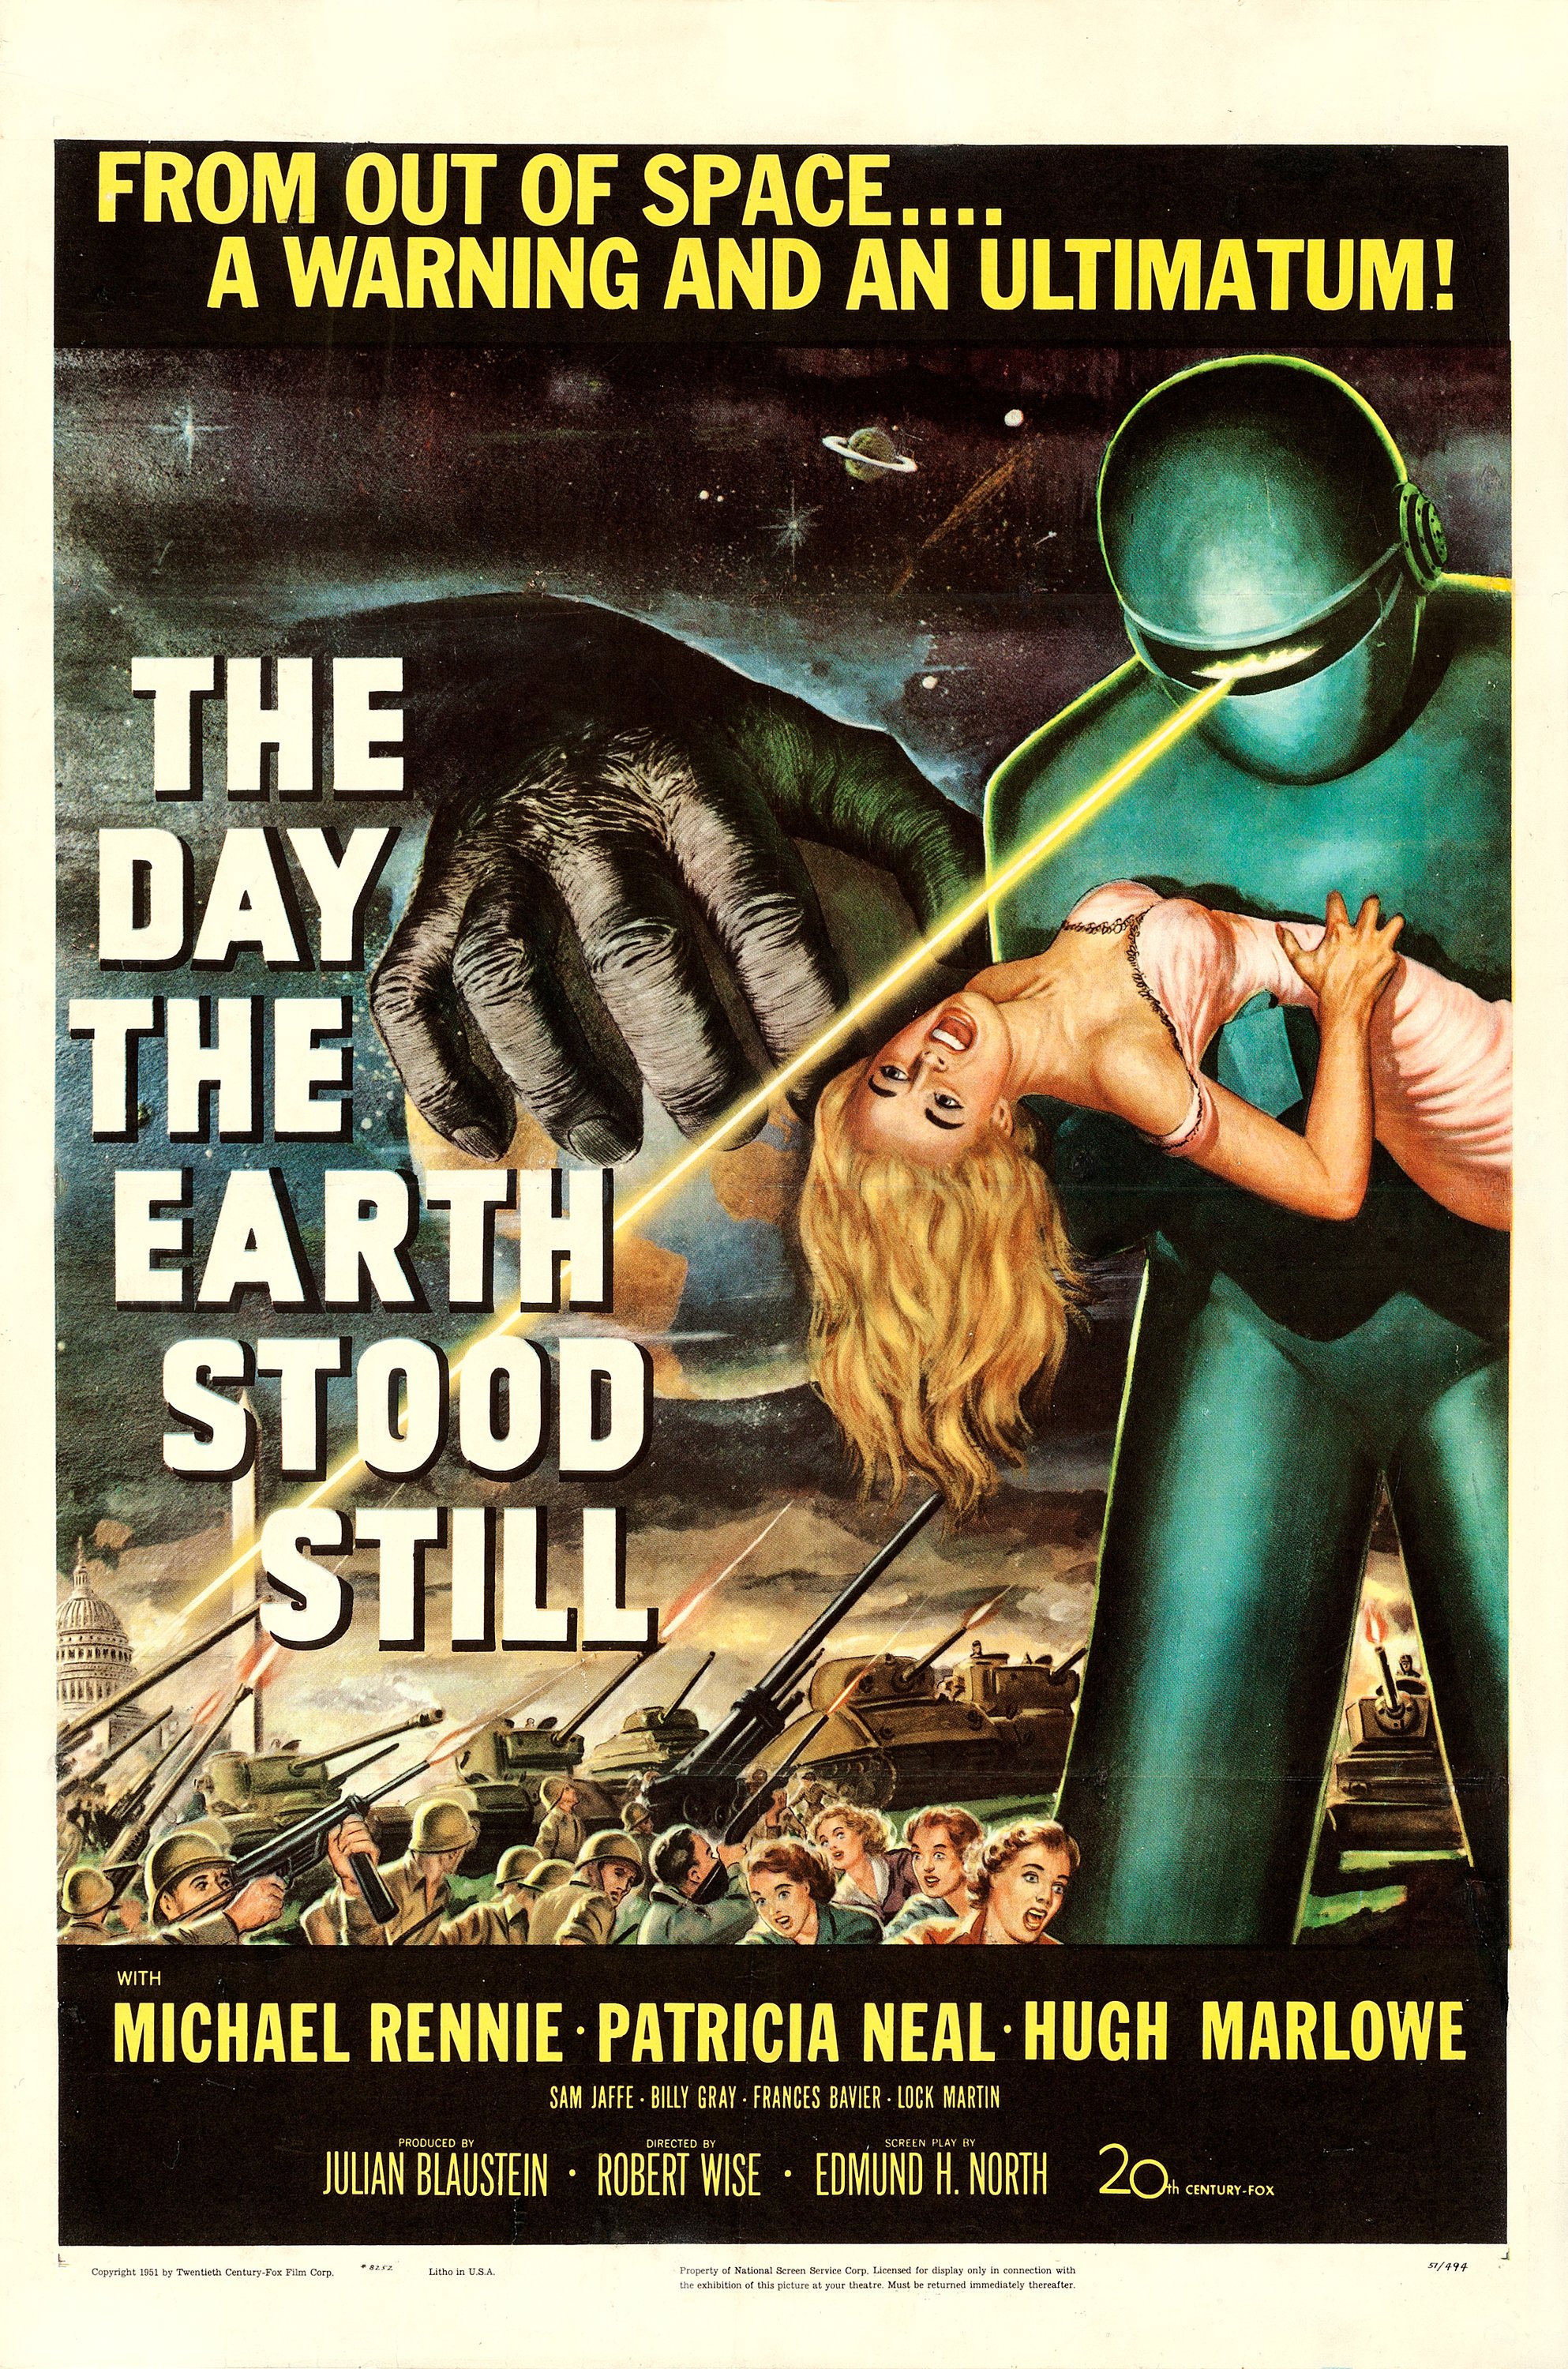 image for the day the earth stood still